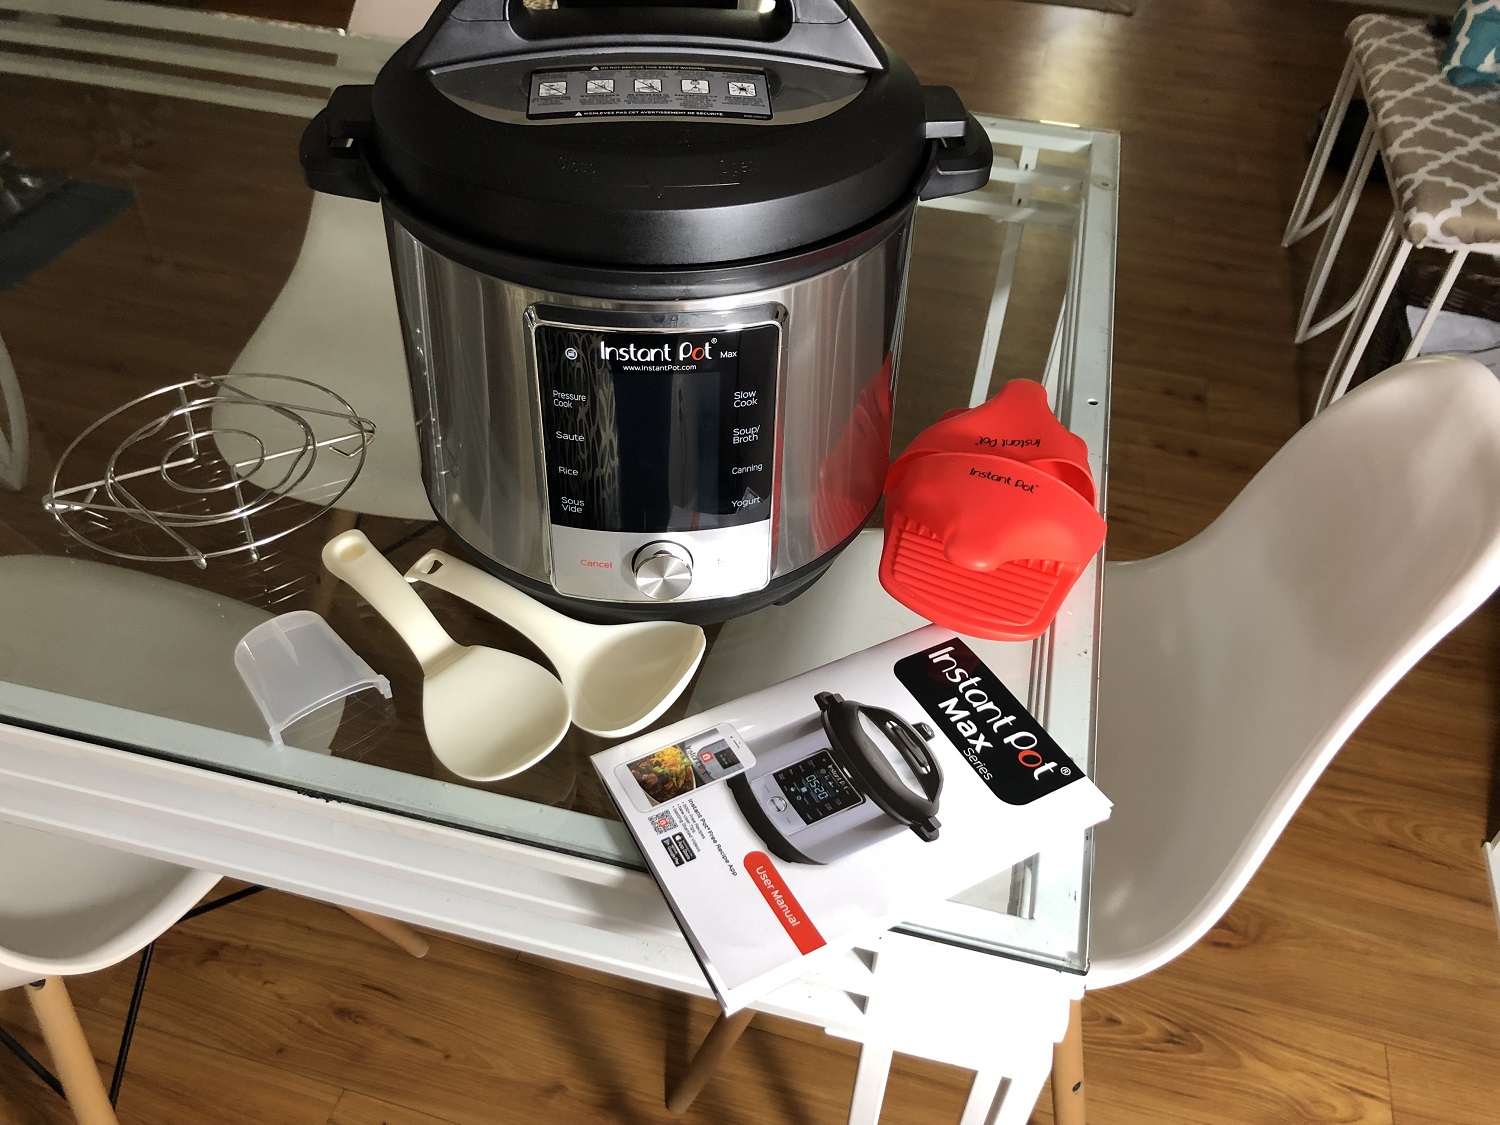 Instant Pot Max - Pressure Canning Feature Review